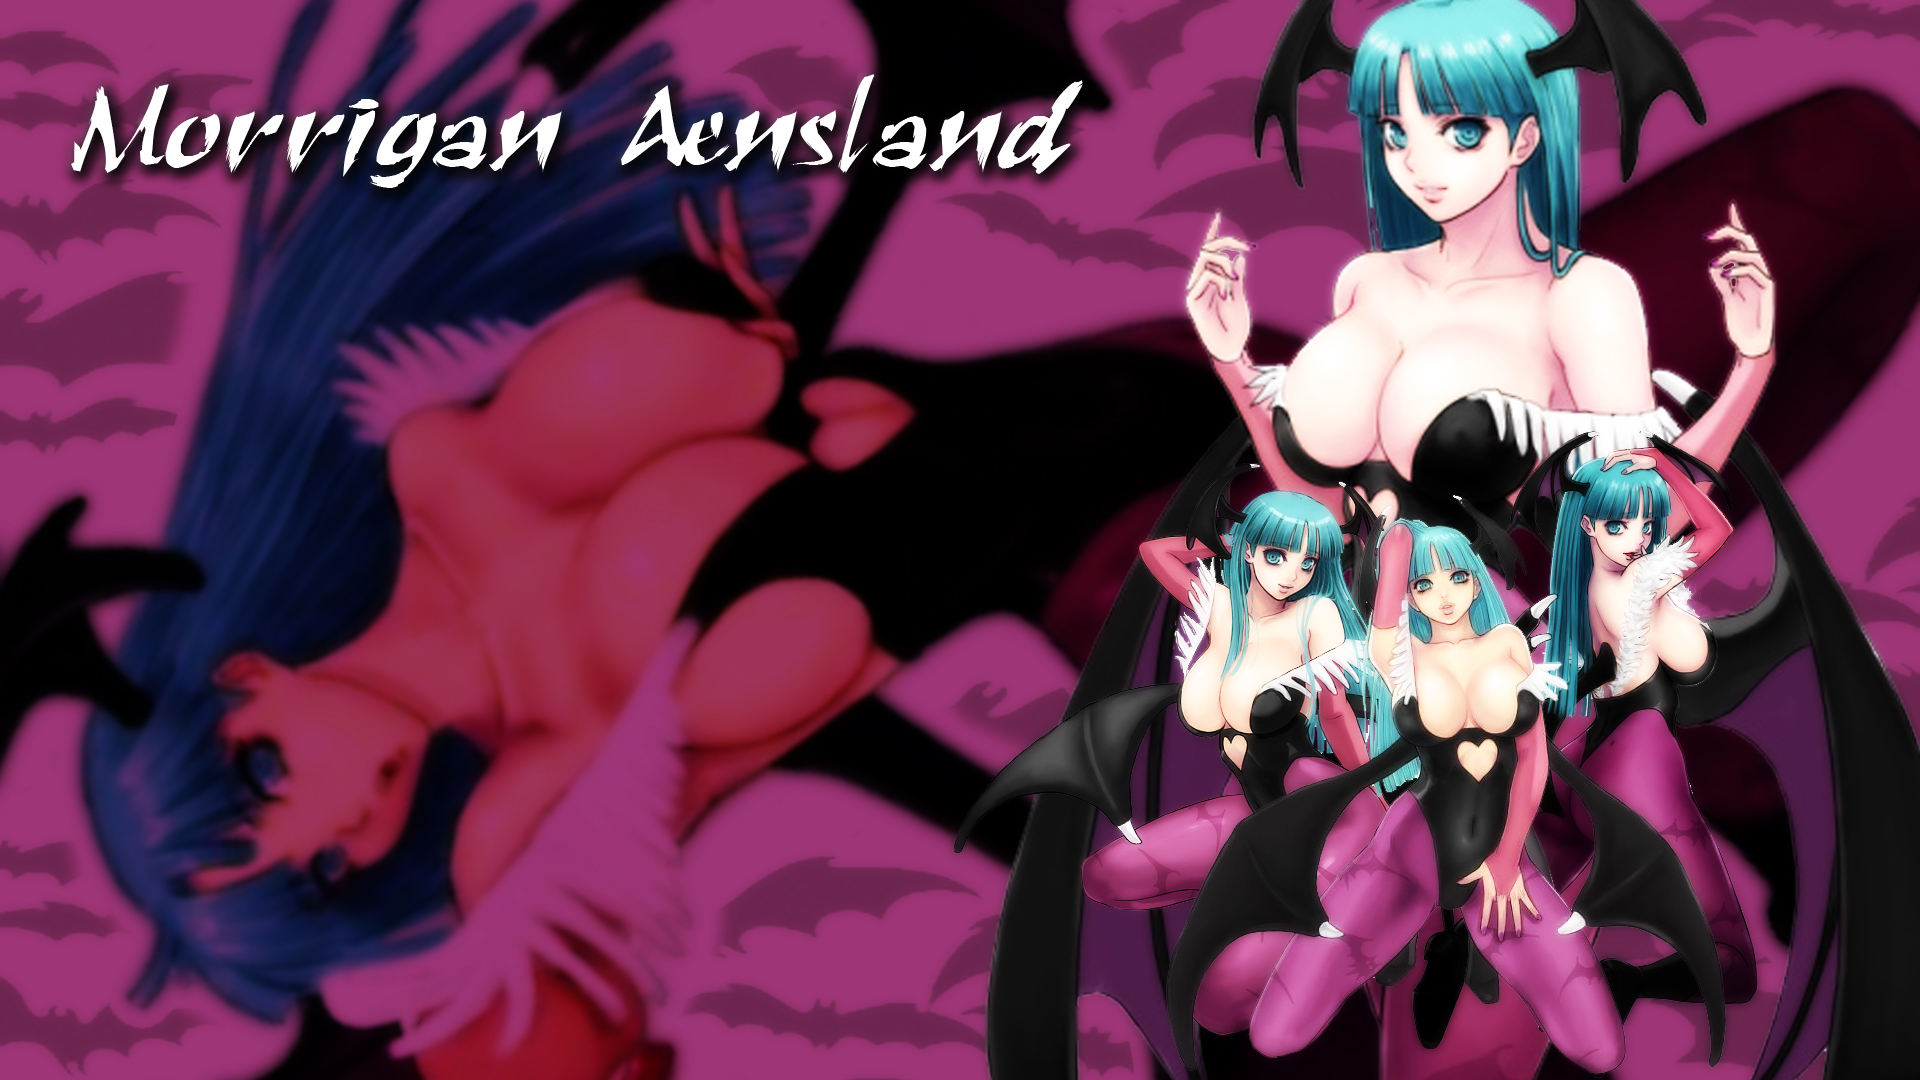 Digital Other This Is A Morrigan Aensland Wallpaper Designed By Me